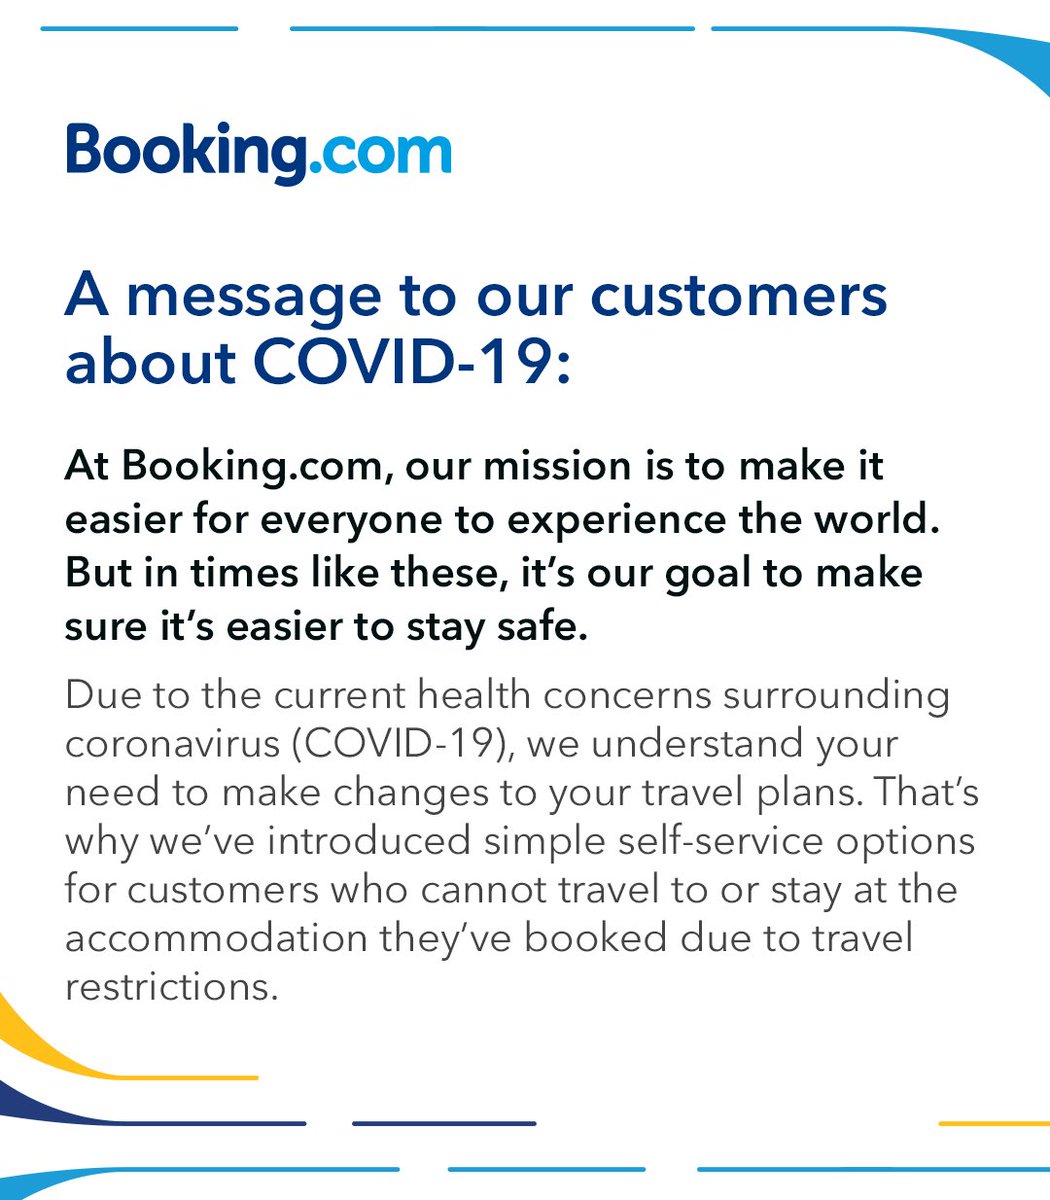 For our customers impacted by travel restrictions related to COVID-19, we've added self-service options. Please sign in to your  http://Booking.com  to see what options are available to you:  http://book.i.ng/6002TdMce 